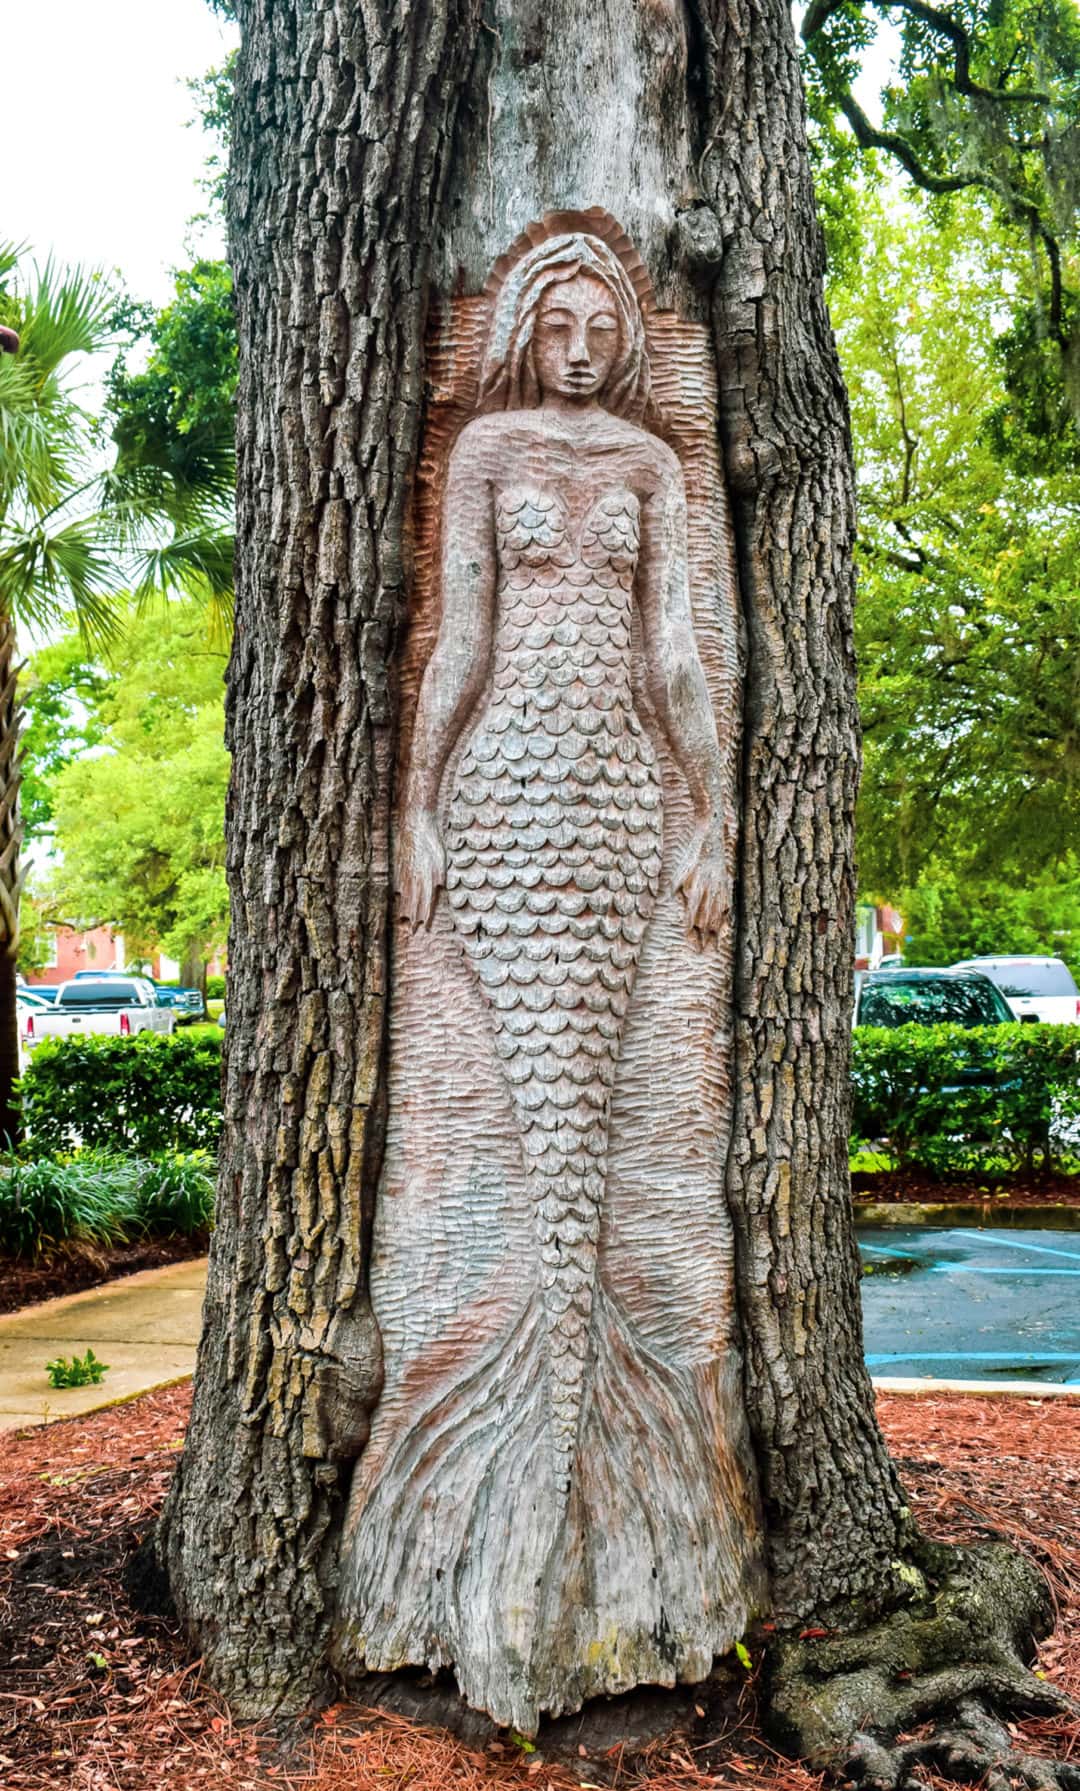 An mermaid carved into the side of a tree